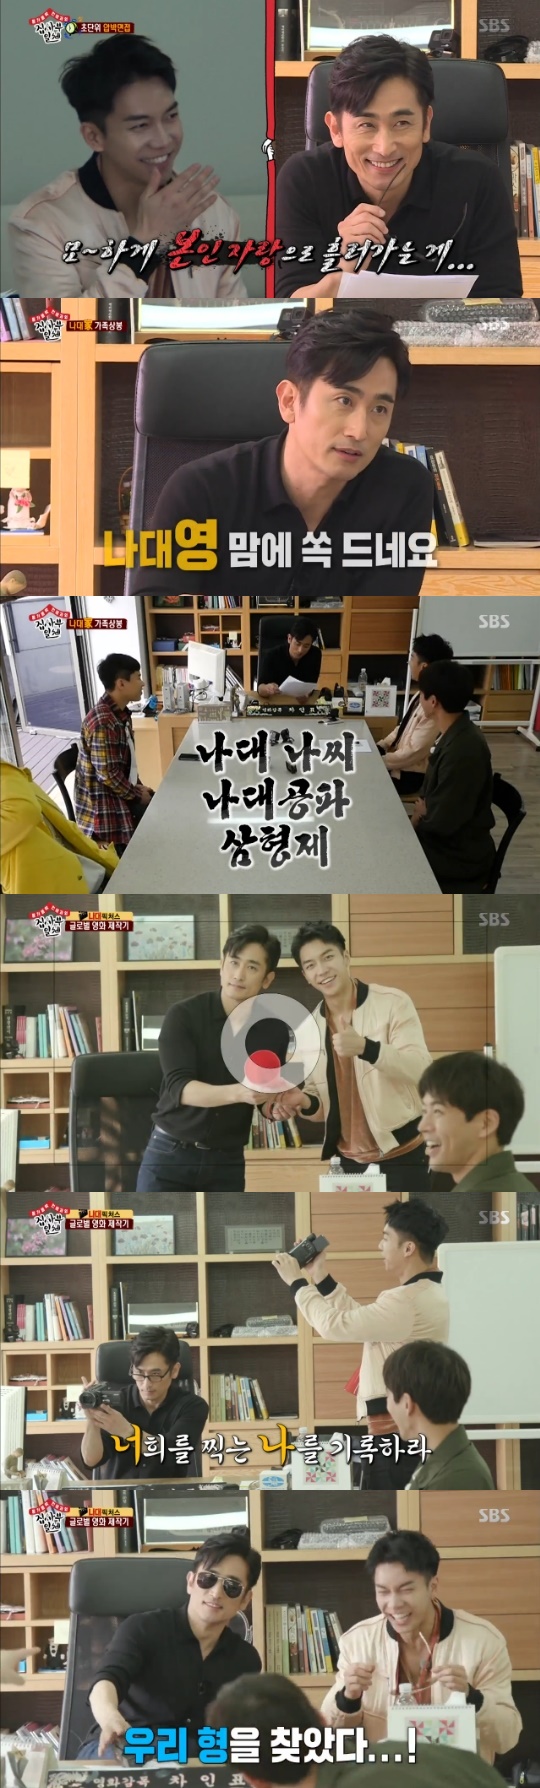 All The Butlers Sub Cha In-pyo and Lee Seung-gi gave a laugh at a similar rate.On SBS All The Butlers broadcast on 22nd, the figure of the disciples who were impressed with Passion of Sub Cha In-pyo was drawn.This masters master was Cha In-pyo.Charisma drifts from Cha In-pyo which appeared with camera.Cha In-pyo asked I am not who you are to train again, and as a breeding material I was born in 1995, I have not seen the work, but the power and voice drifting, I am honored.I will finish it in a hurry. Cha In-pyo is a new film director.I myself became a film director, he said.Subsequently the teacher read the self-introduction written by his disciples steadily.Looking at the debut song of Lee Seung-gi, his father asked Lee Seung-gi for a song.Lee Seung-gi sang songs Cha In-pyo asked, The song is so low, Lee Seung-gi sang again.Lee Seung-gi answered My sister has changed every week in broadcasting when the masters father asked, That sister is, indeed who the yotta.My father and I watched Lee Seung-gi carefully watching Yang Se-hyeongs mistake The personality is similar to myself, and talked to say, It is acceptable if it says bad, but Nadenun is bad, he invited us to laugh .Subsequently, the masters father says, There was an obvious that Nadeda was humiliated.My friend took karining at the middle school when I was a group leader.I wanted to match the stick 100 instead for a sense of responsibility, he continued his pride.Lee Sang-yun said, I am sorry in the words, but it looks like the Gilang.I will be strangely proud of myself and invited us to laugh.Cha In-pyo became My British following Lee Seung-gi who is already My Day to Japan, Yang Se-hyeong which is My generation.My father-in-law gave Lee Seung-gi as an assistant director, he decided to photograph the making film, centering on himself.His disciples saw that they were two brothers.Especially Yang Se-hyeong invited us to laugh, If the winner is big, it will be like this.Sunglasses, uniforms, memorial photos were straight as I liked.Lee Seung-gi laughed and lapped tears, saying, It was the first time for those who decided what I wanted to do in advance.Afterwards, the master explained that he will take a documentary with OReals US challenge go showing off a non verbal comedy.Meanwhile, Cha In-pyos alarm music flowed out, Cha In-pyo began to push up suddenly.